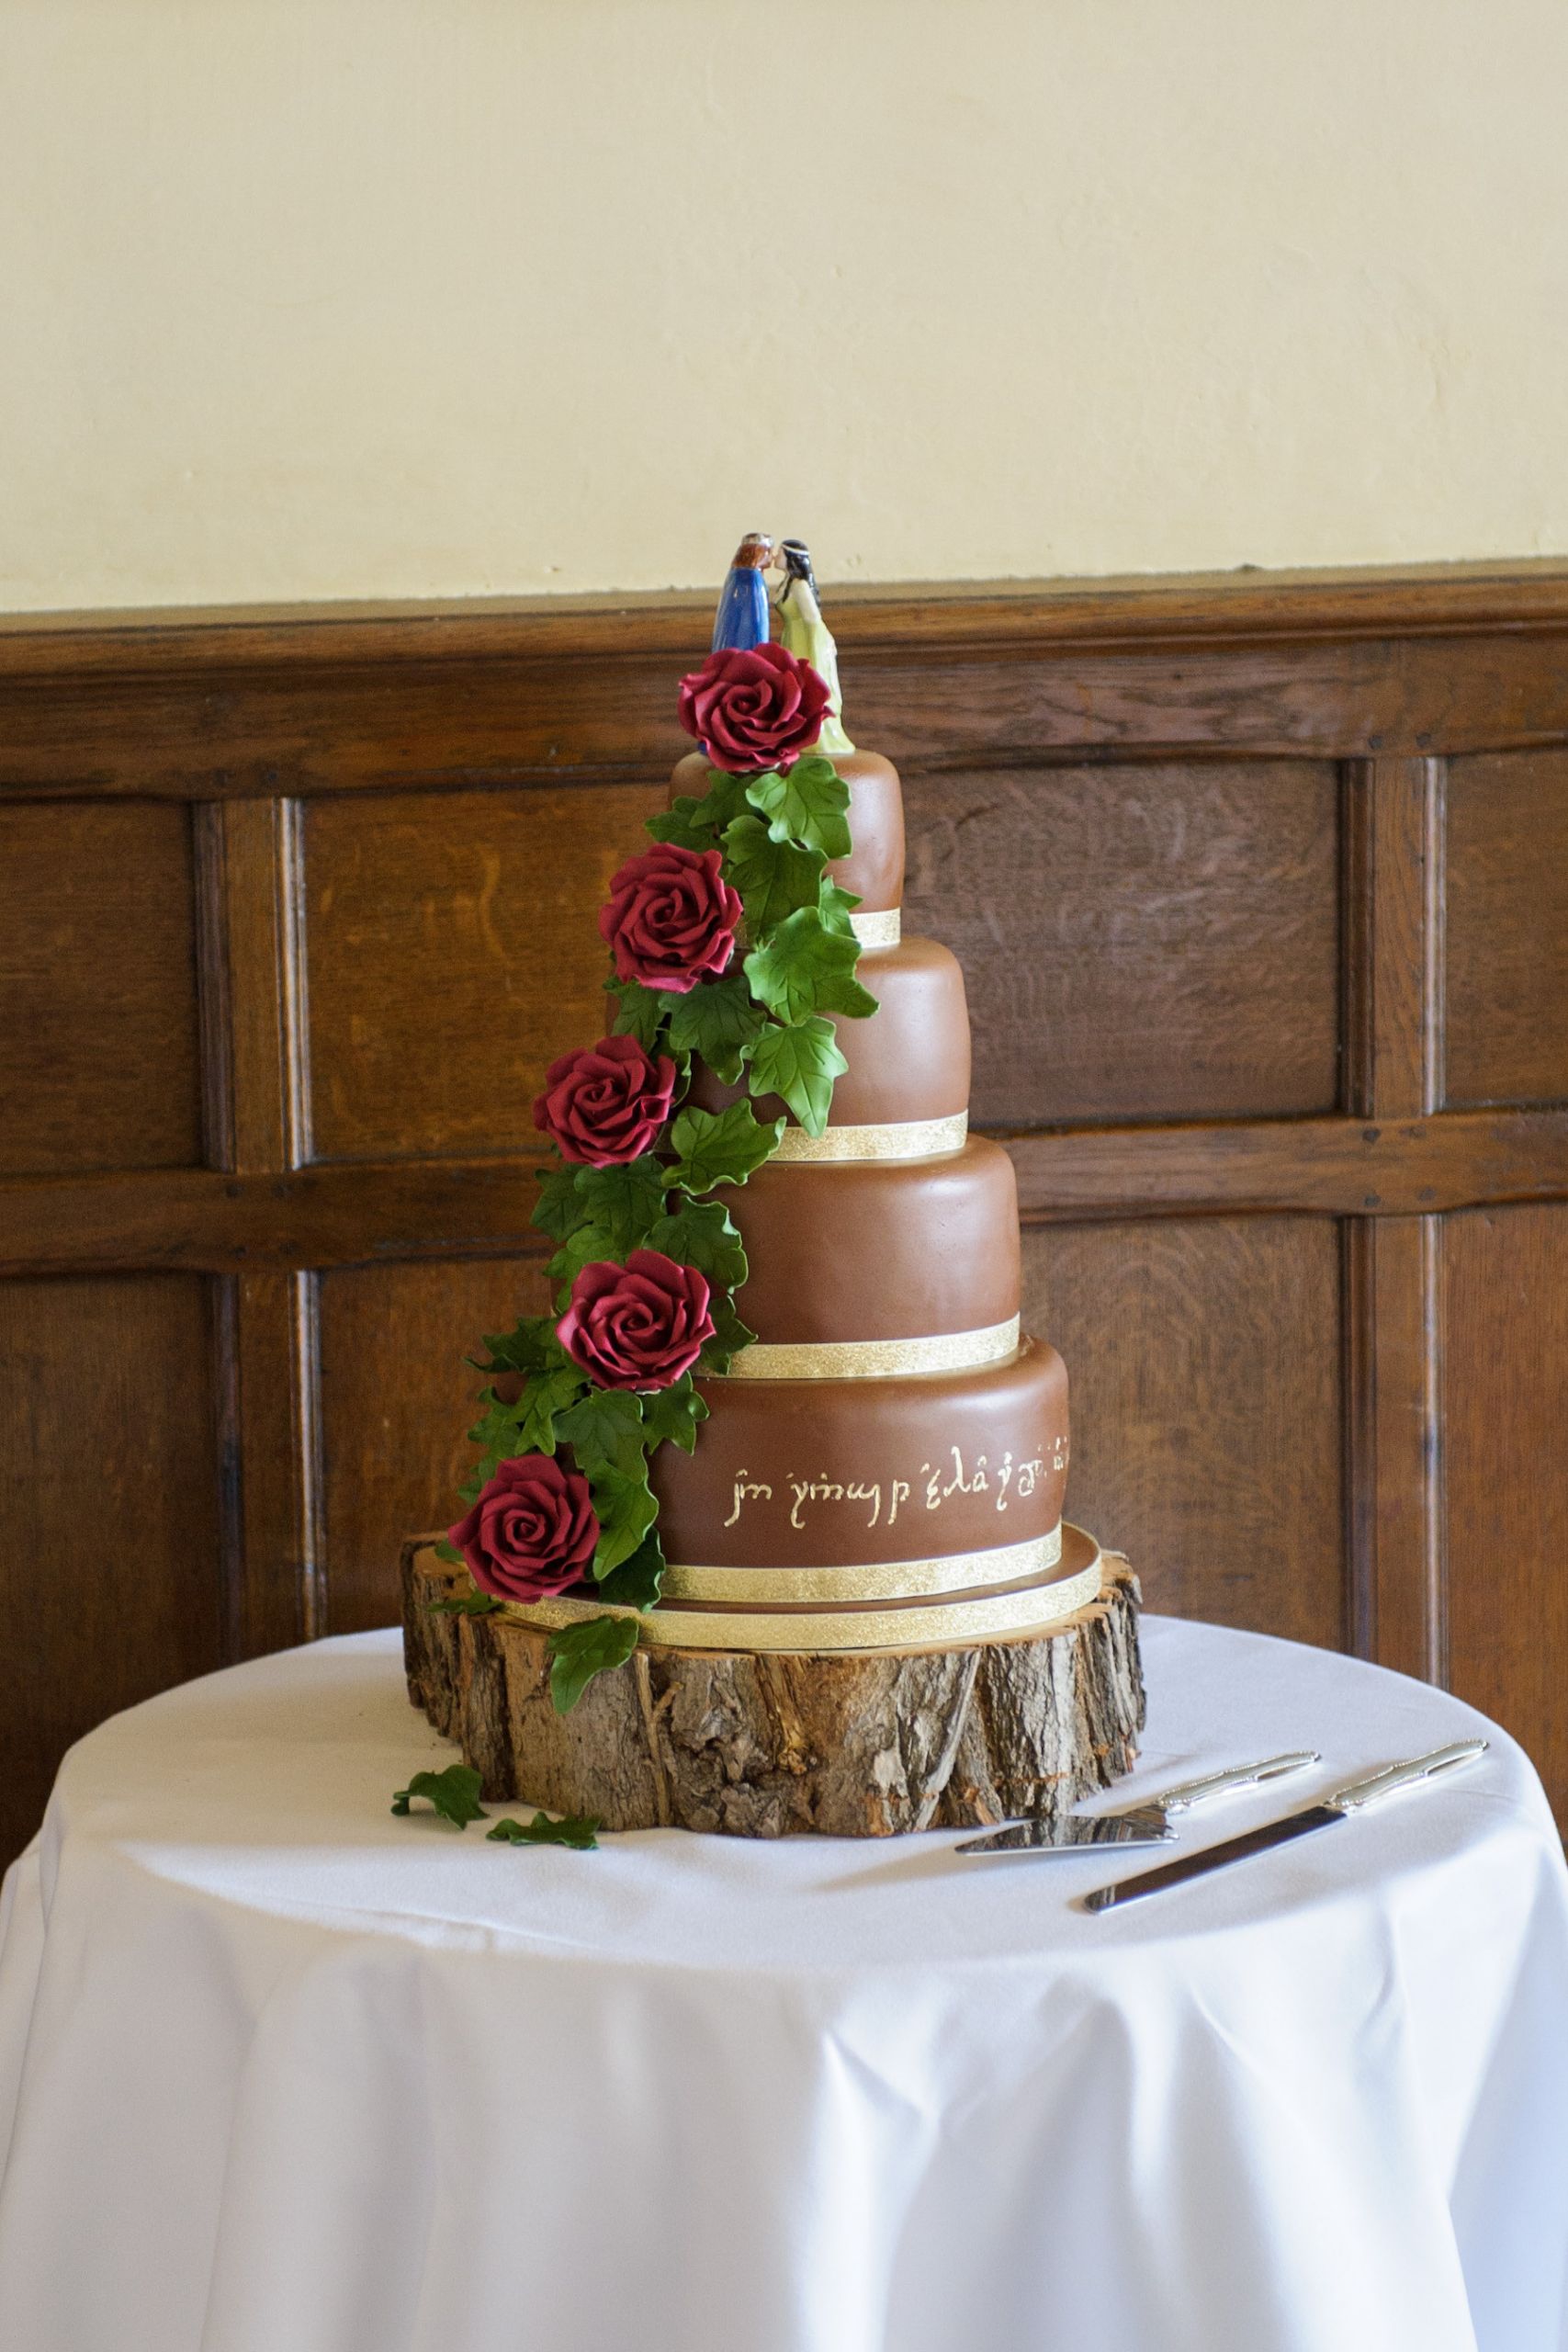 Lord Of The Rings Wedding Cake
 "Wed in Middle Earth" A Lord of the Rings Inspired